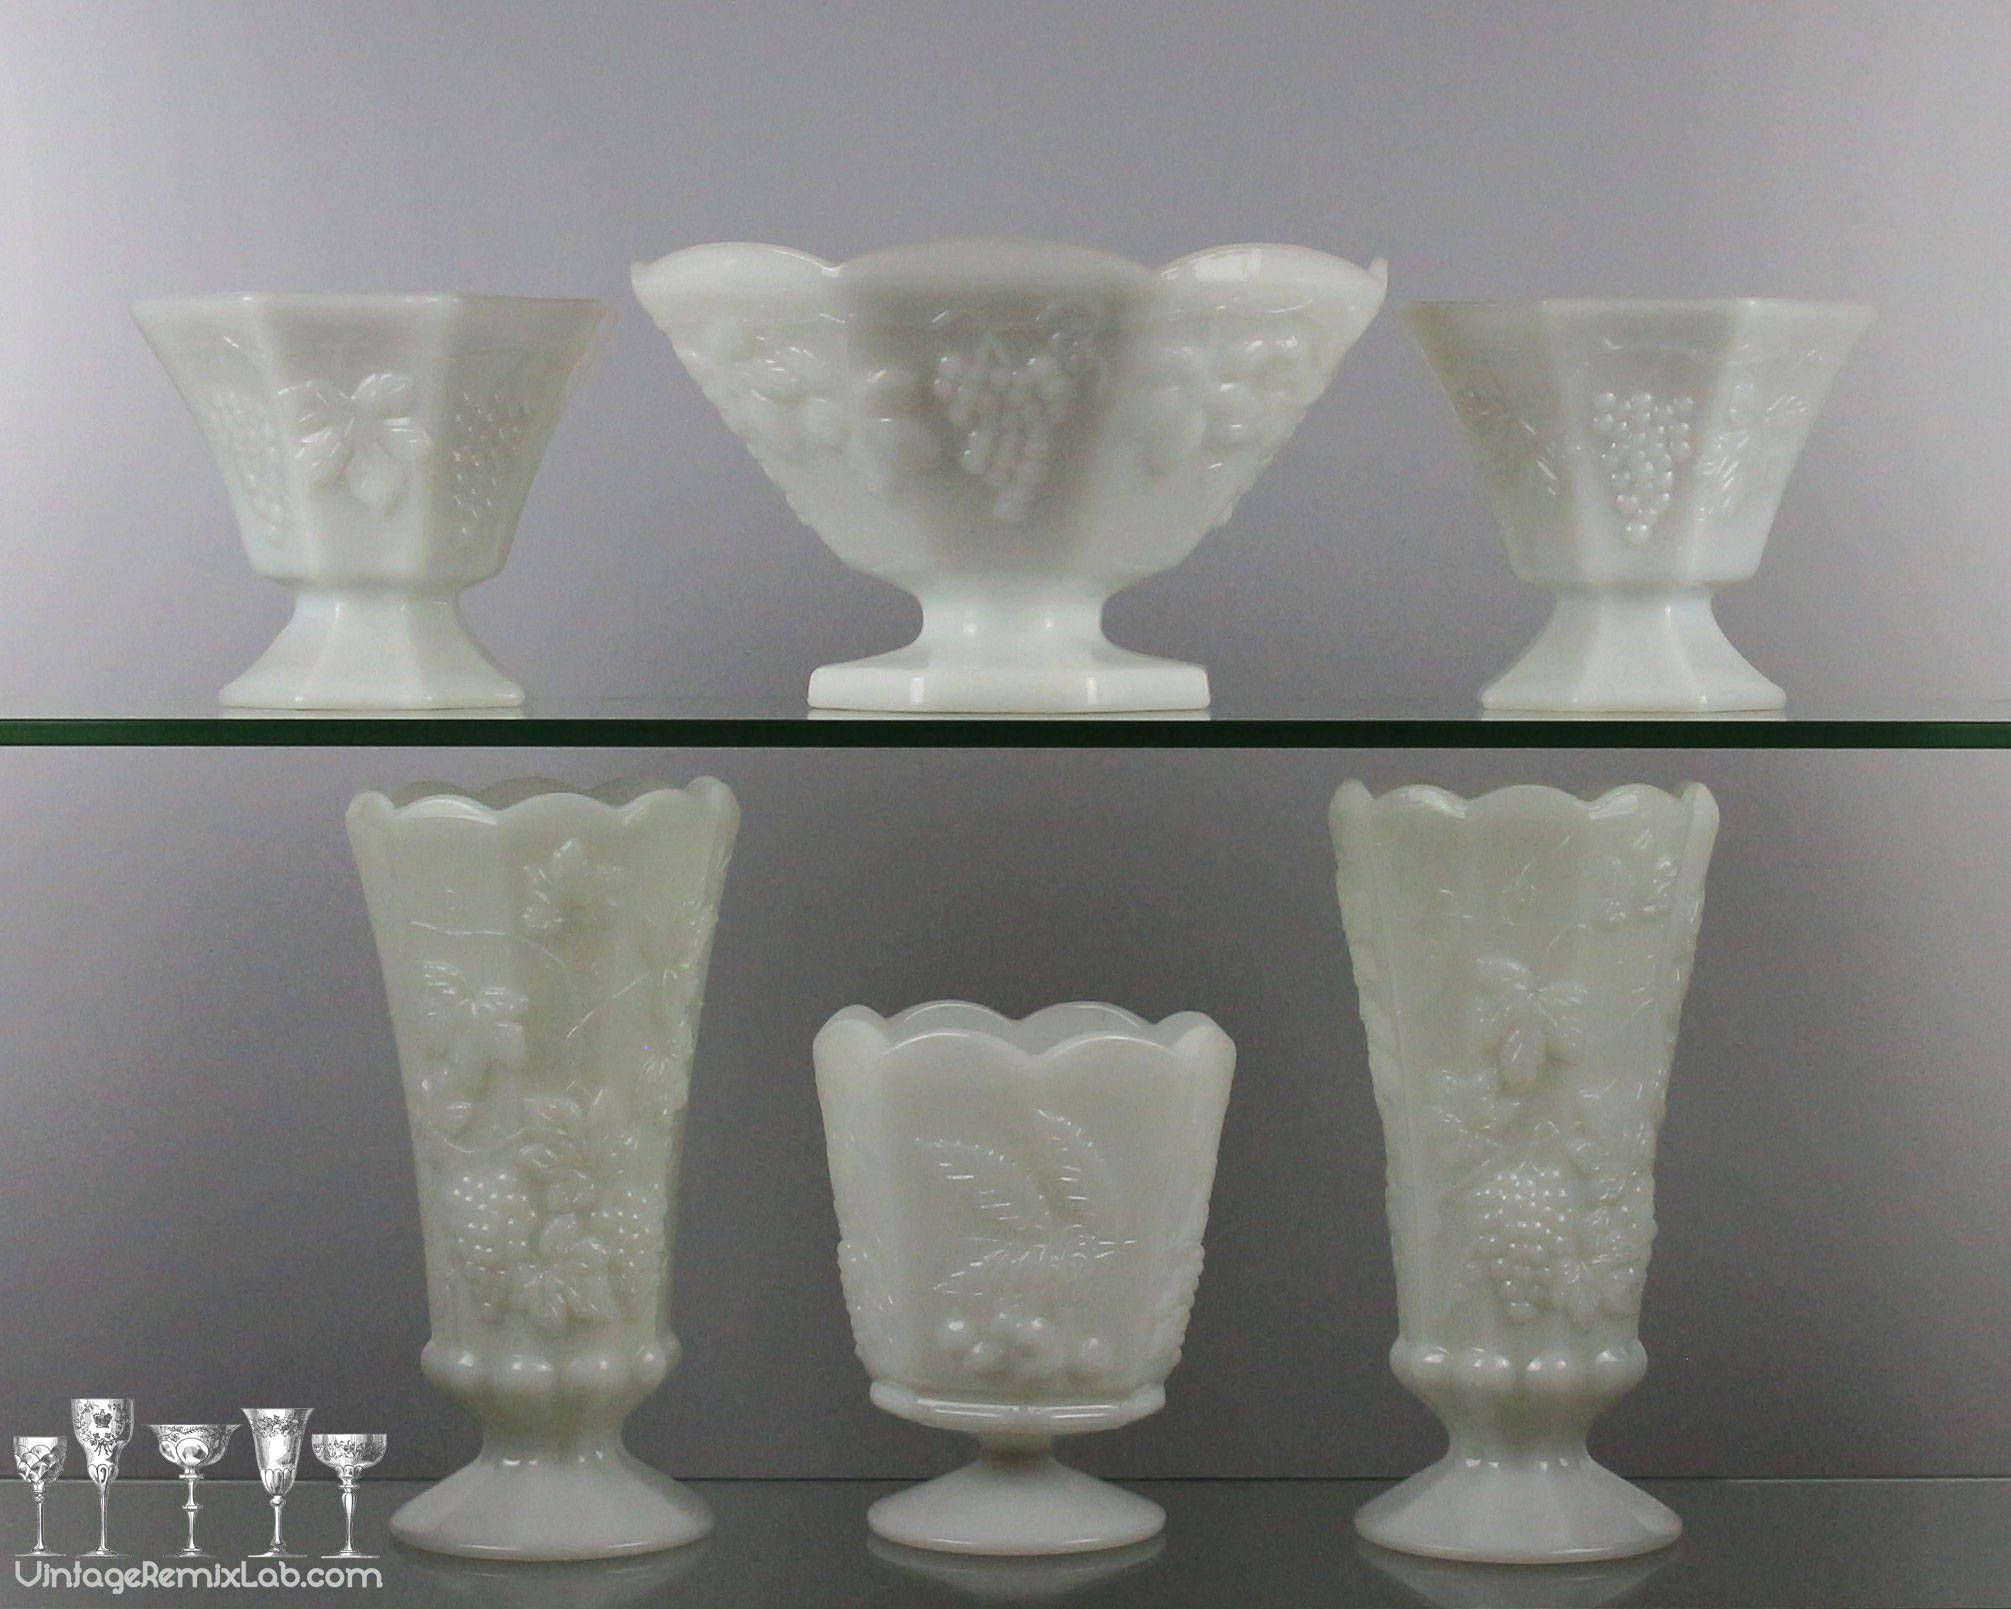 12 Nice Small Hand Blown Glass Vases 2022 free download small hand blown glass vases of 50 glass pedestal vase the weekly world pertaining to vintage 1950s milk glass pedestal vases e280a2 paneled grape design by